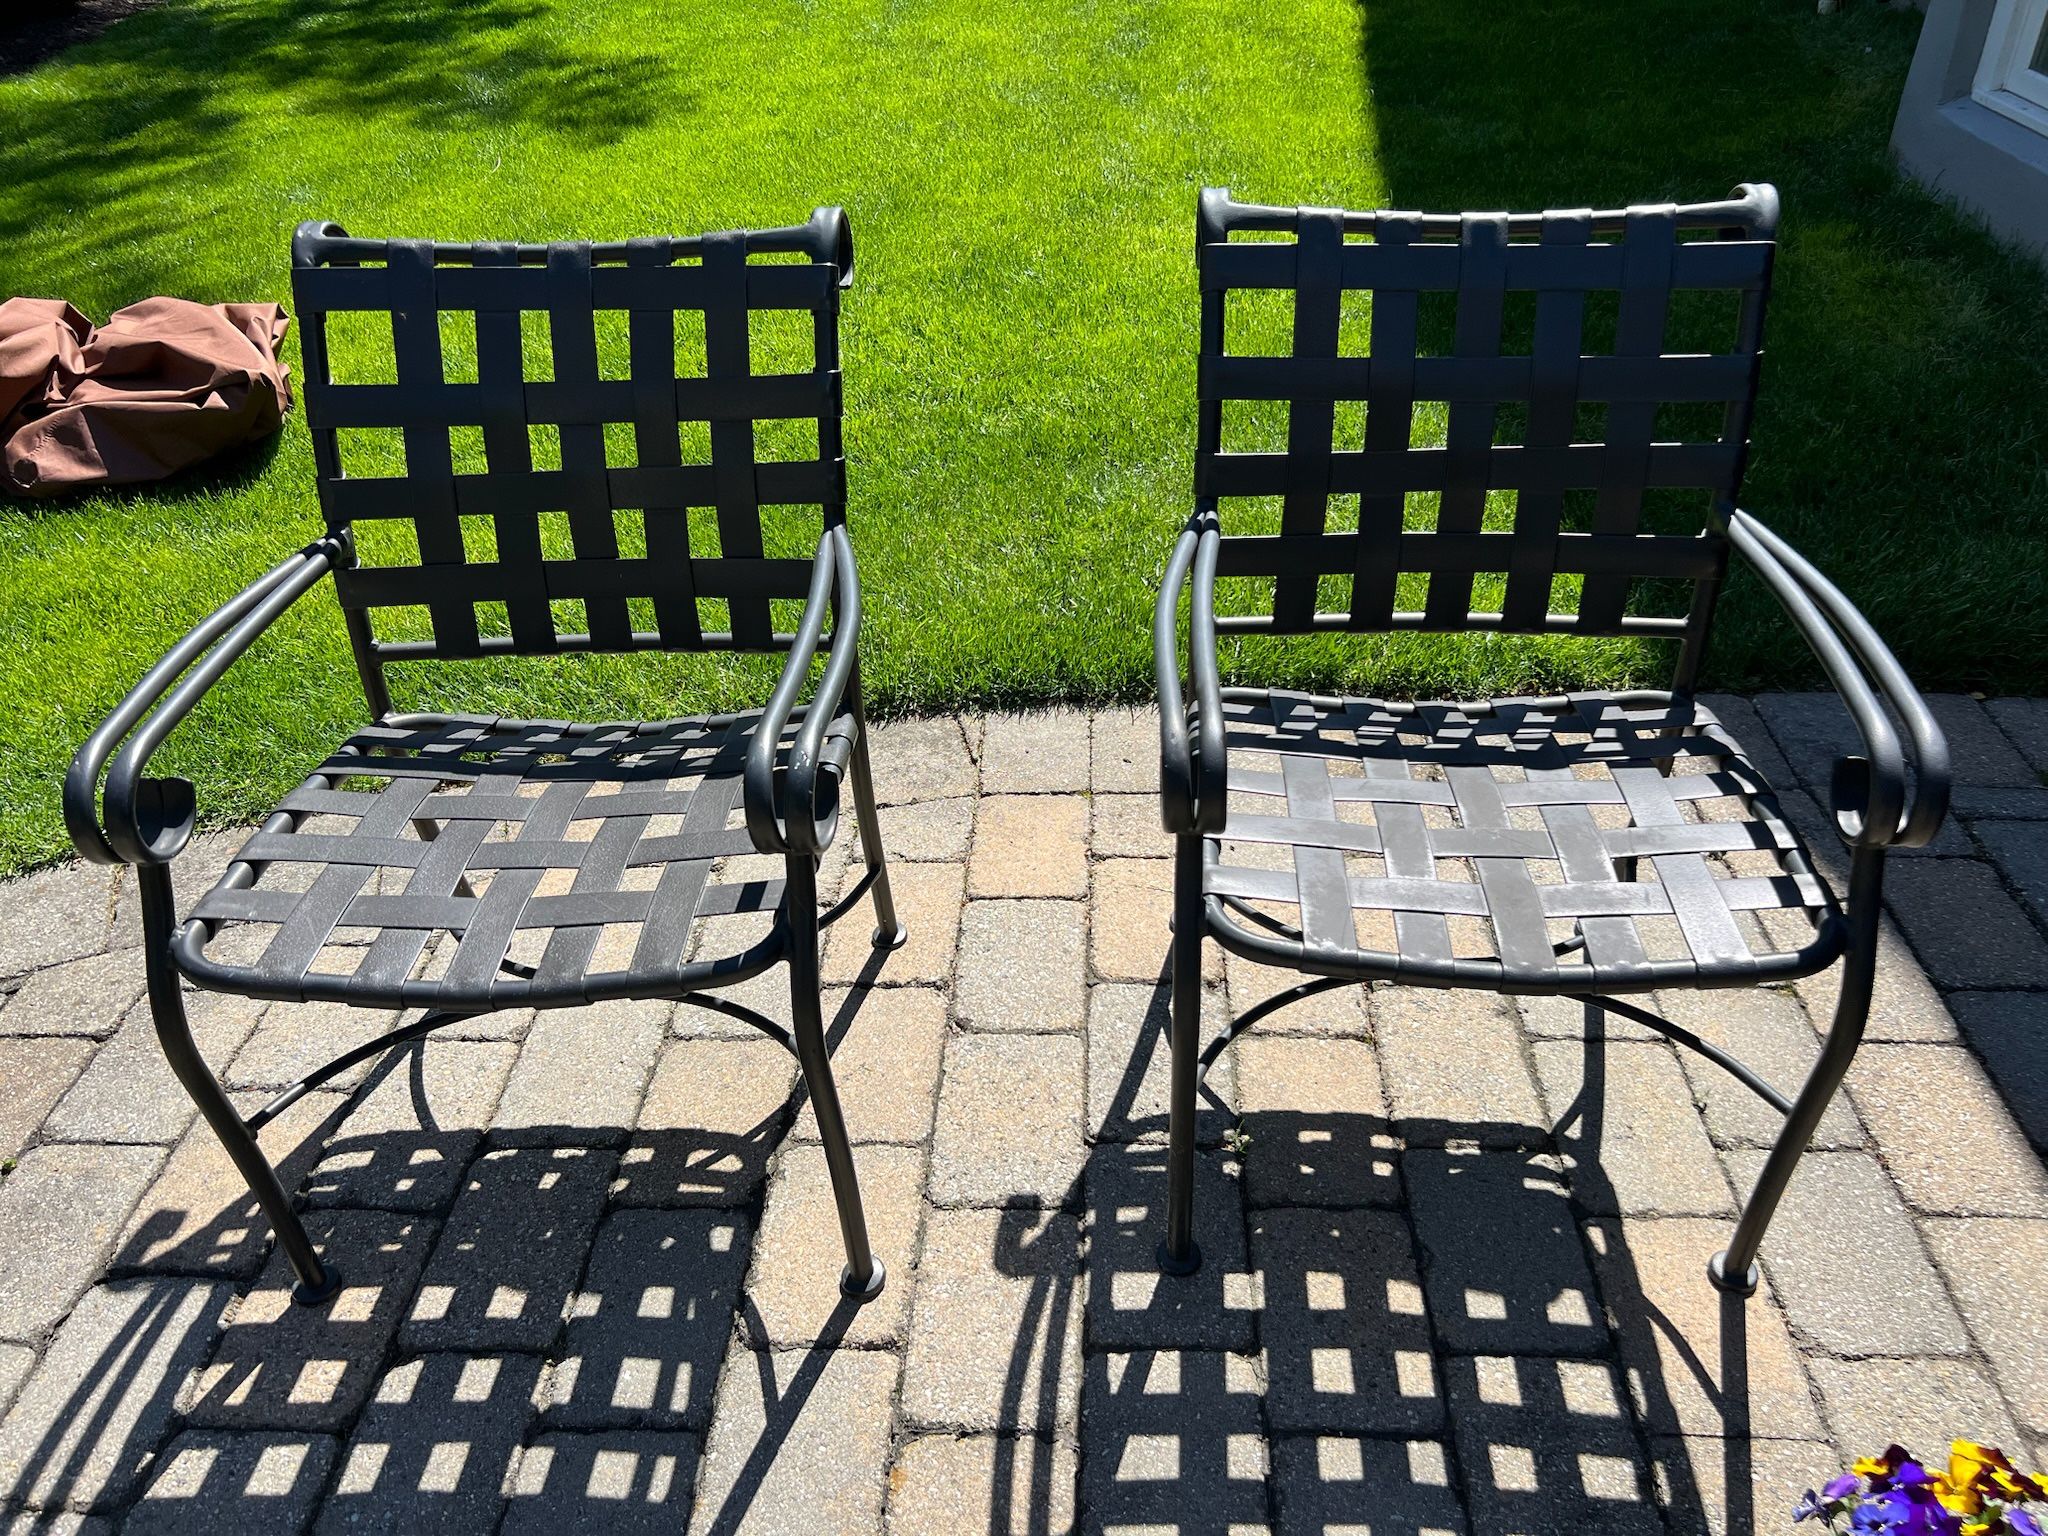 5 Outdoor Chairs in VG Condition Each measures 23”w x 17”sd x 17”sh x 33”h.